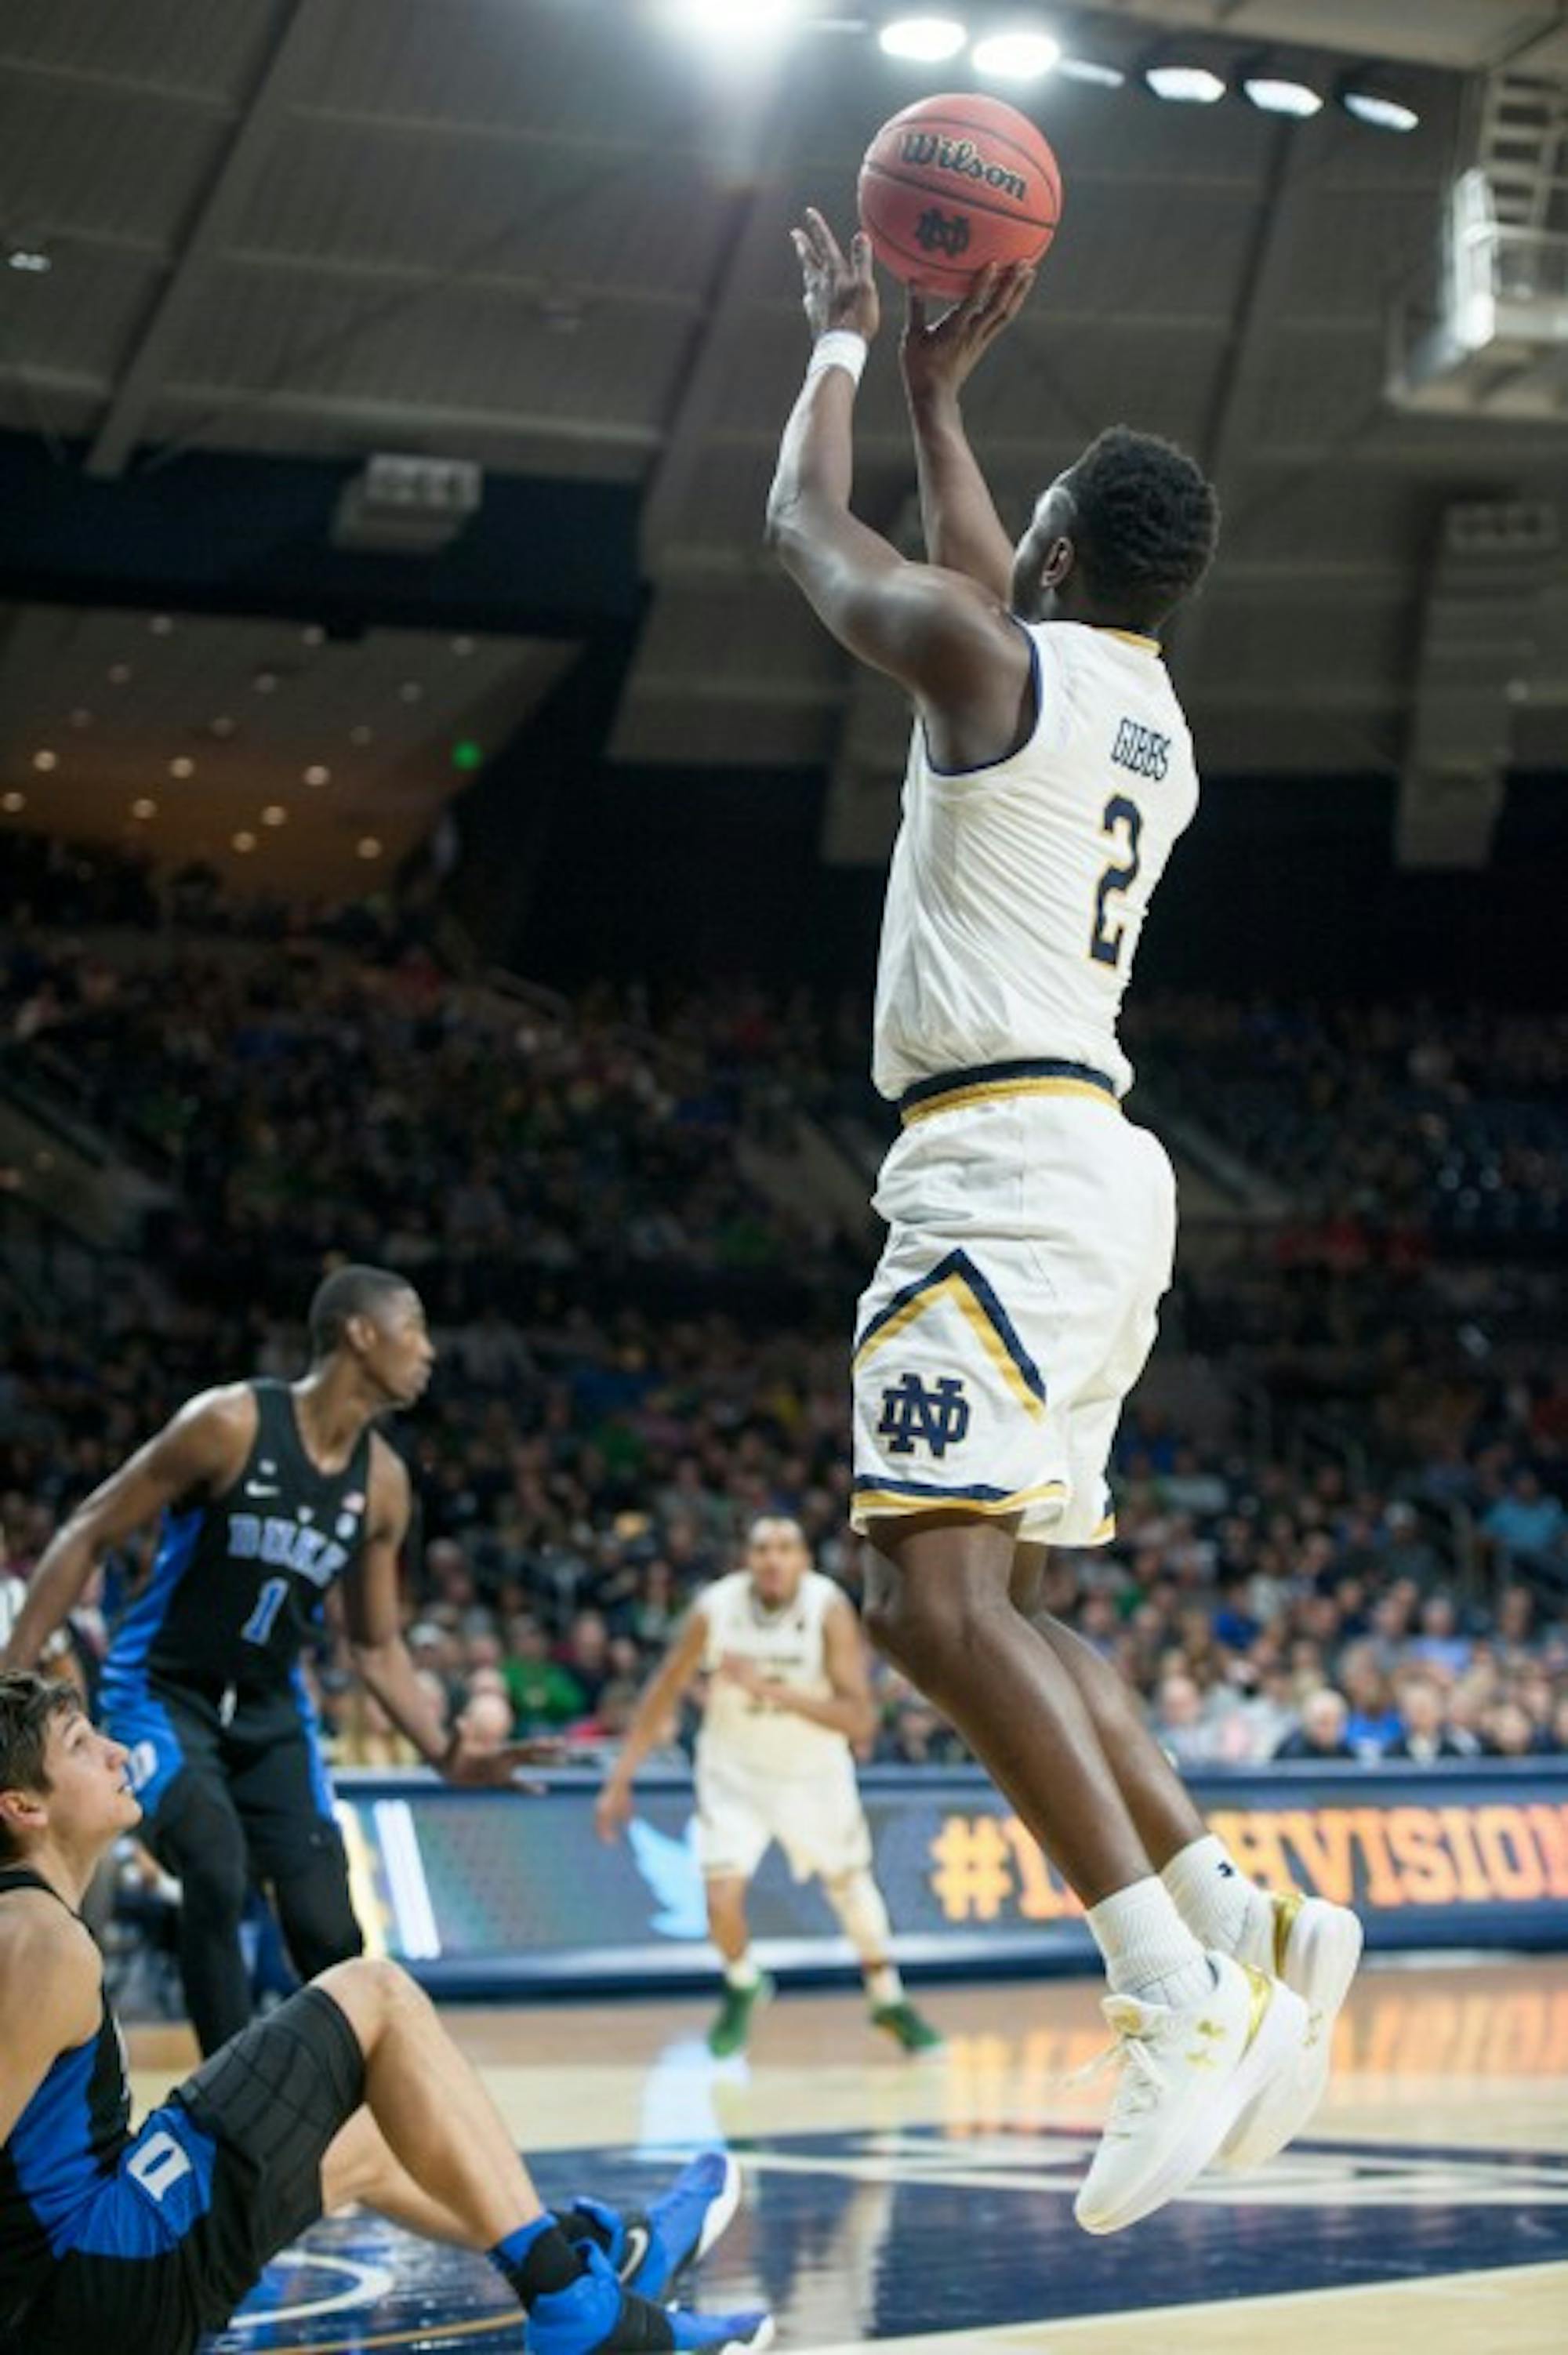 Irish freshman guard T.J. Gibbs shoots a wide-open jumper during Notre Dame’s 84-74 loss to Duke on Jan. 30 at Purcell Pavilion.